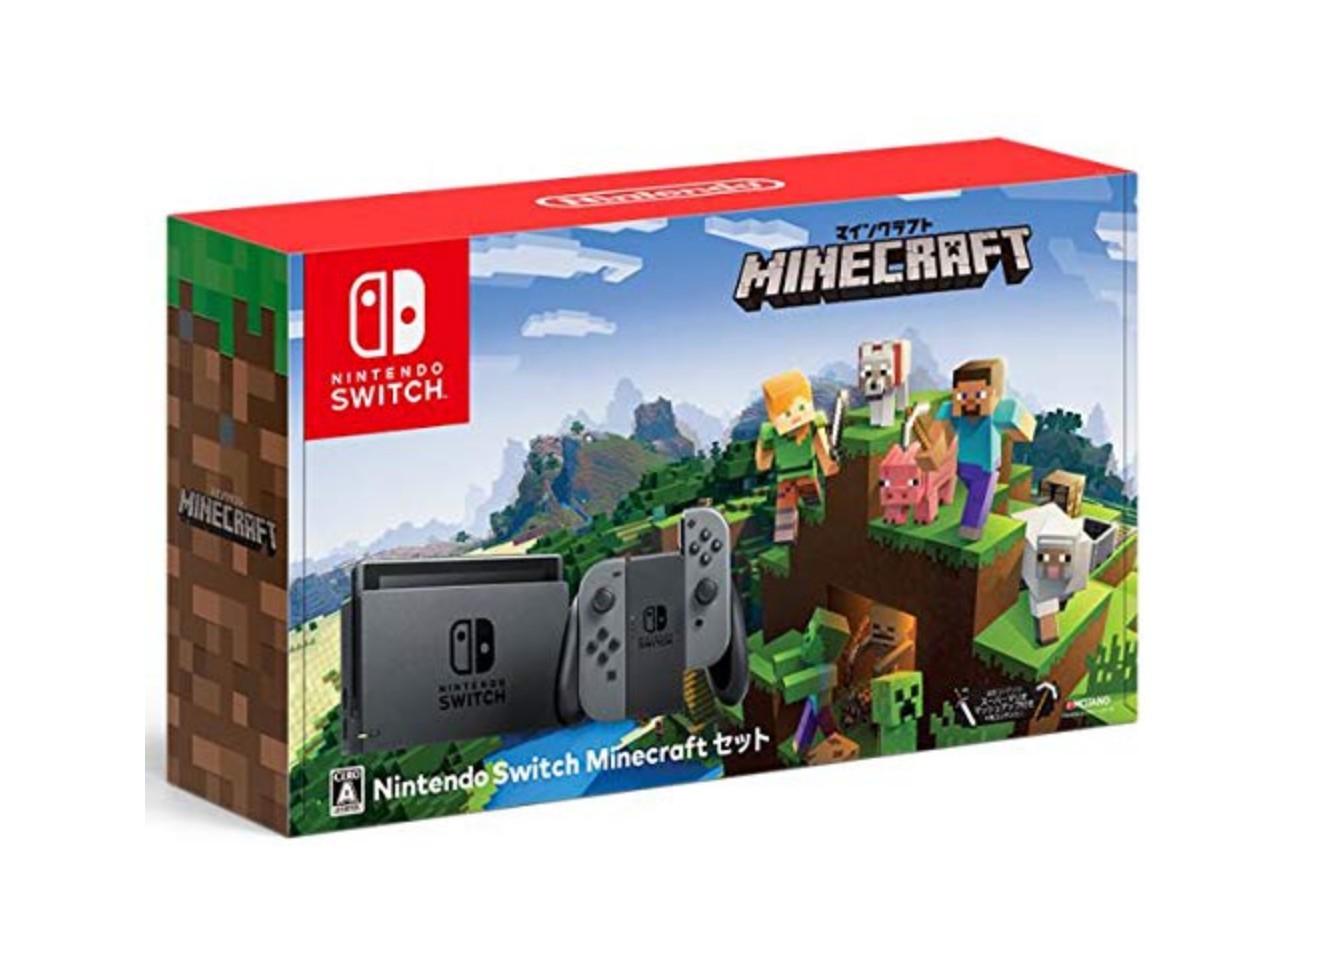 Nintendo Switch Minecraft Set Up For Pre-Order On Amazon Japan